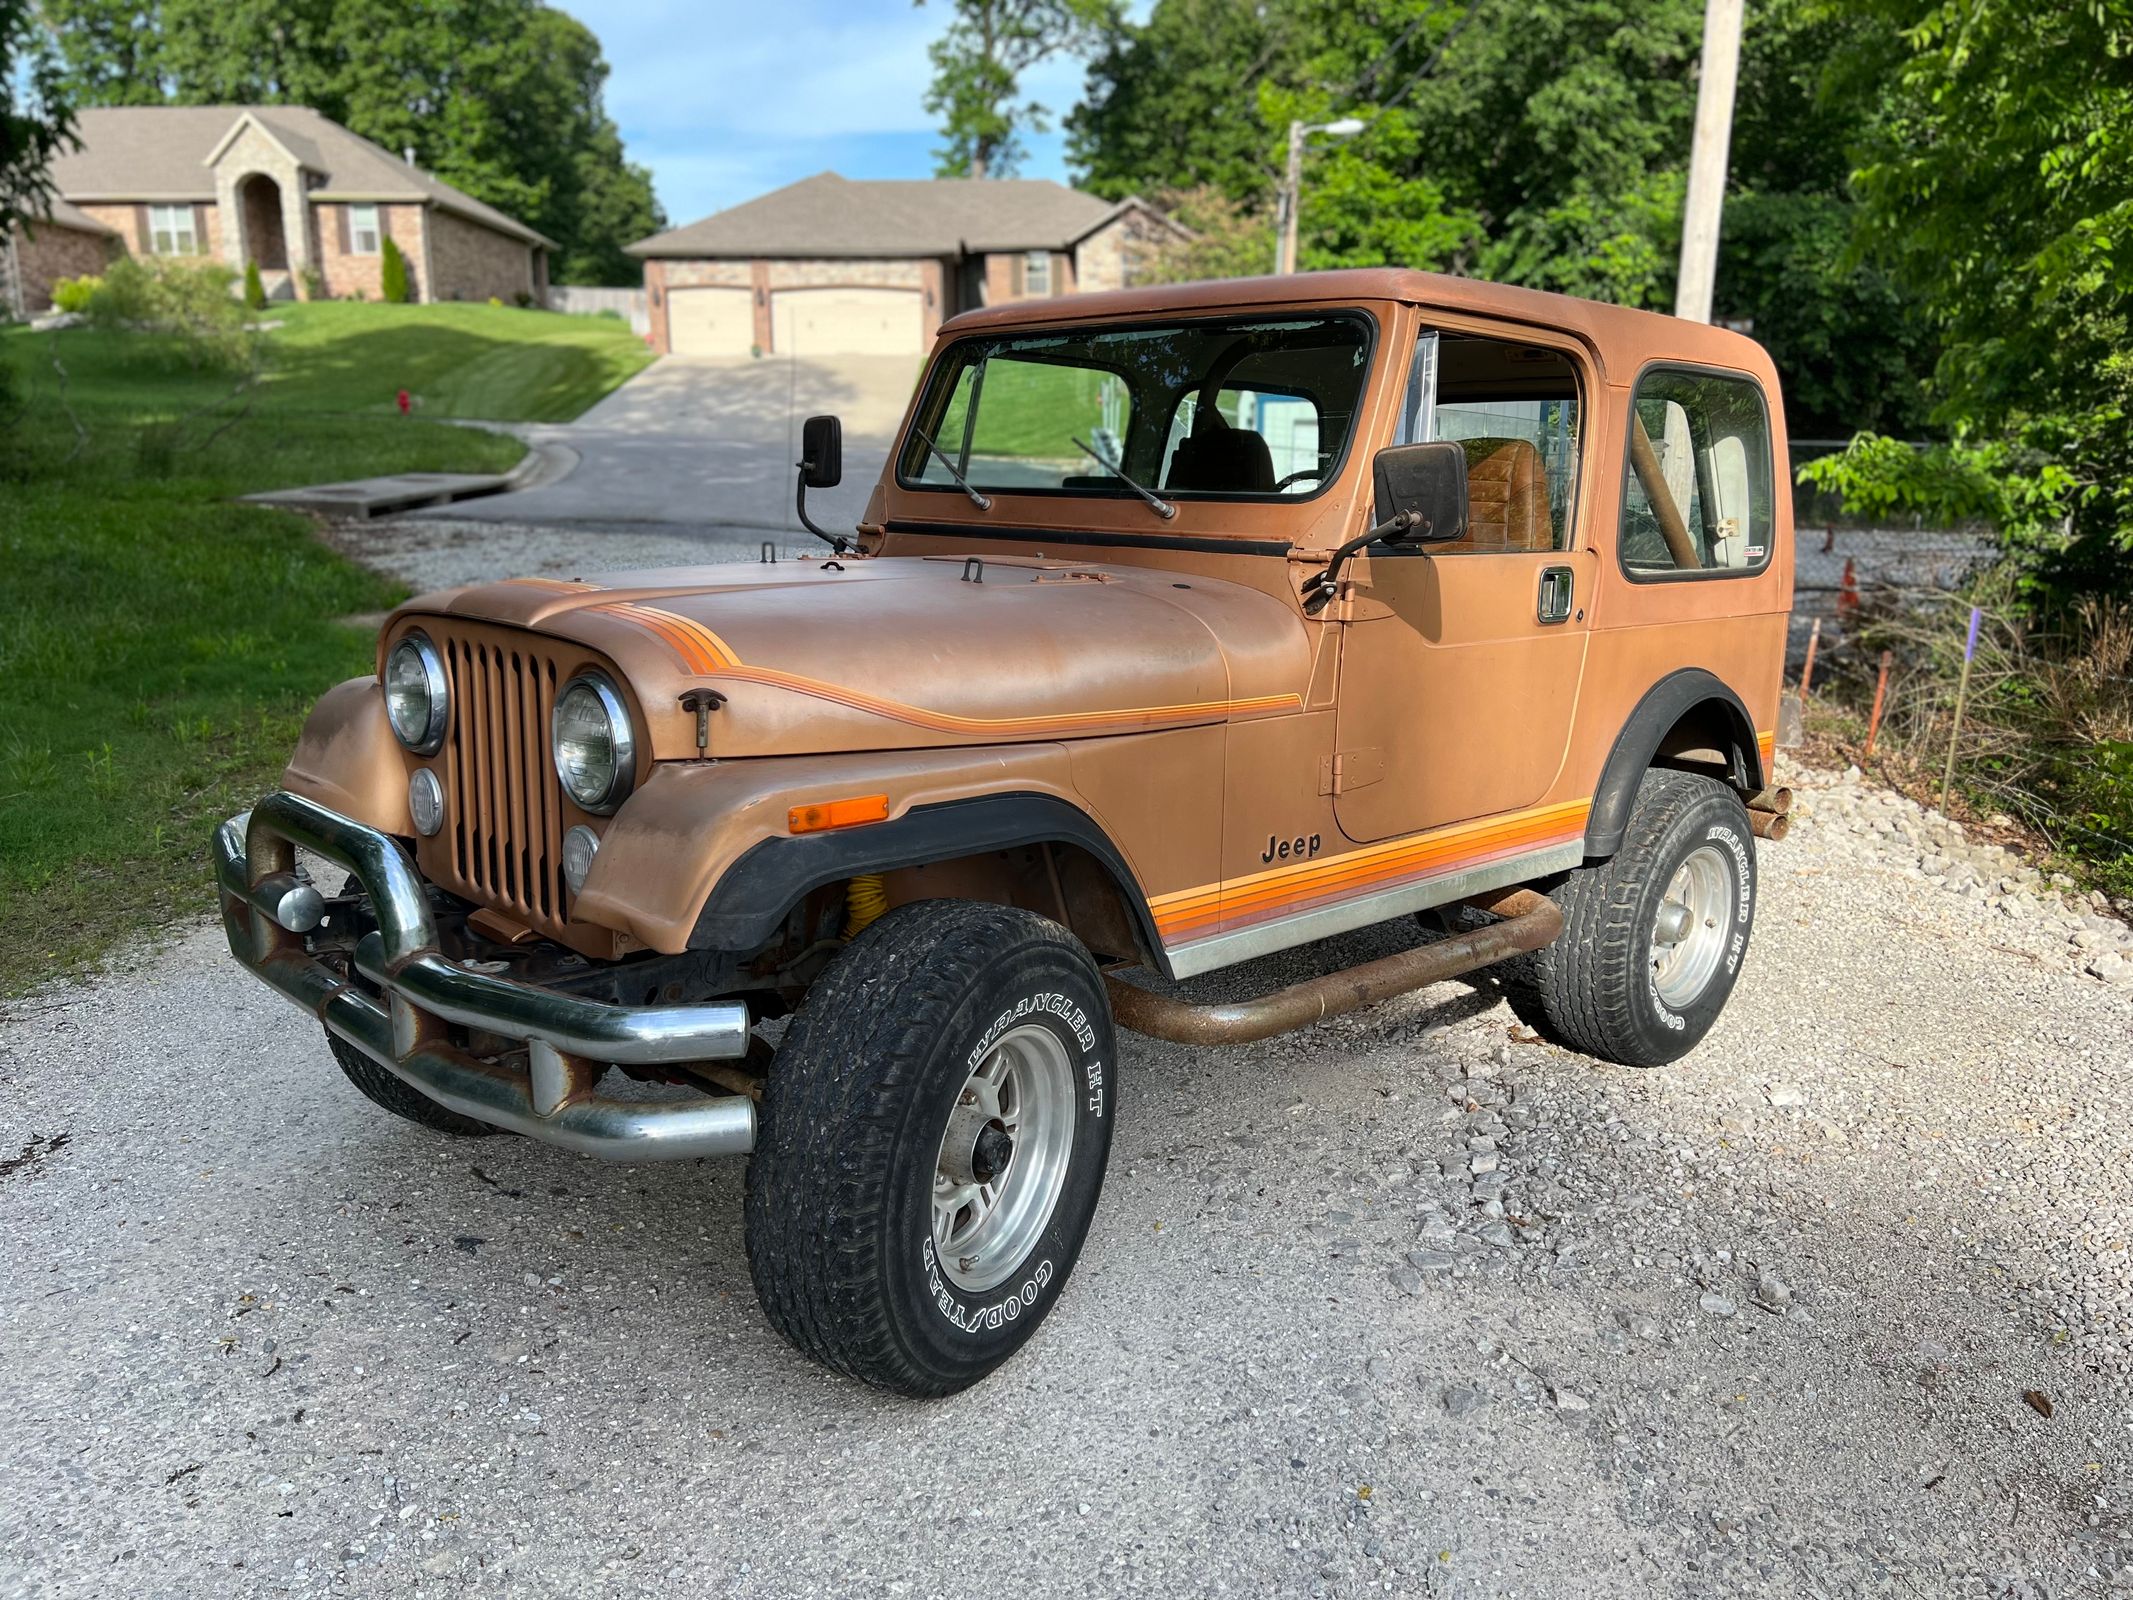 Upgraded and refurbished jeep